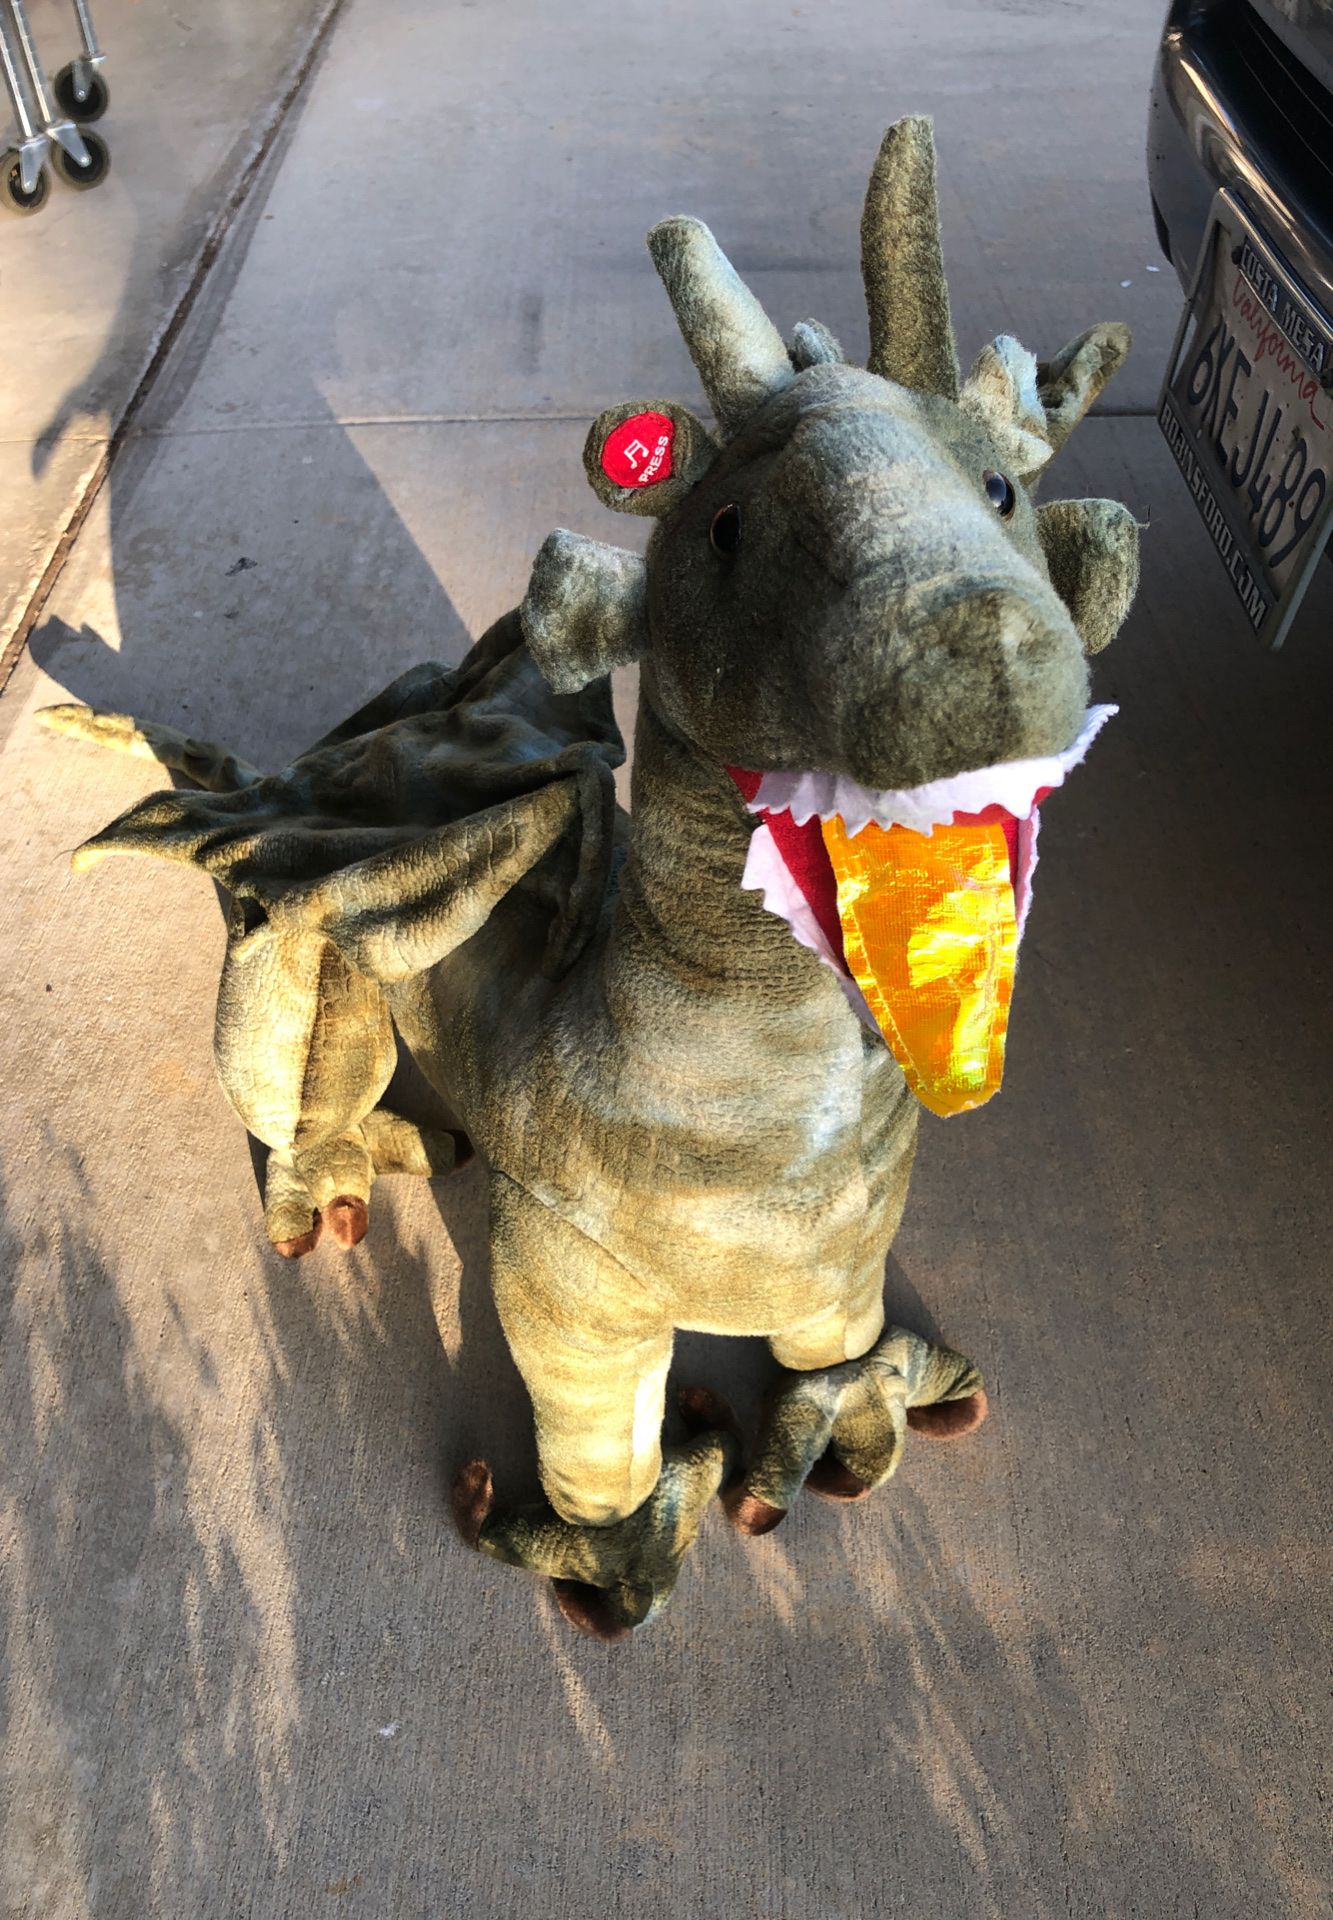 Cloth Play dragon ( little kids can sit on it!) MAKE OFFER or FREE!